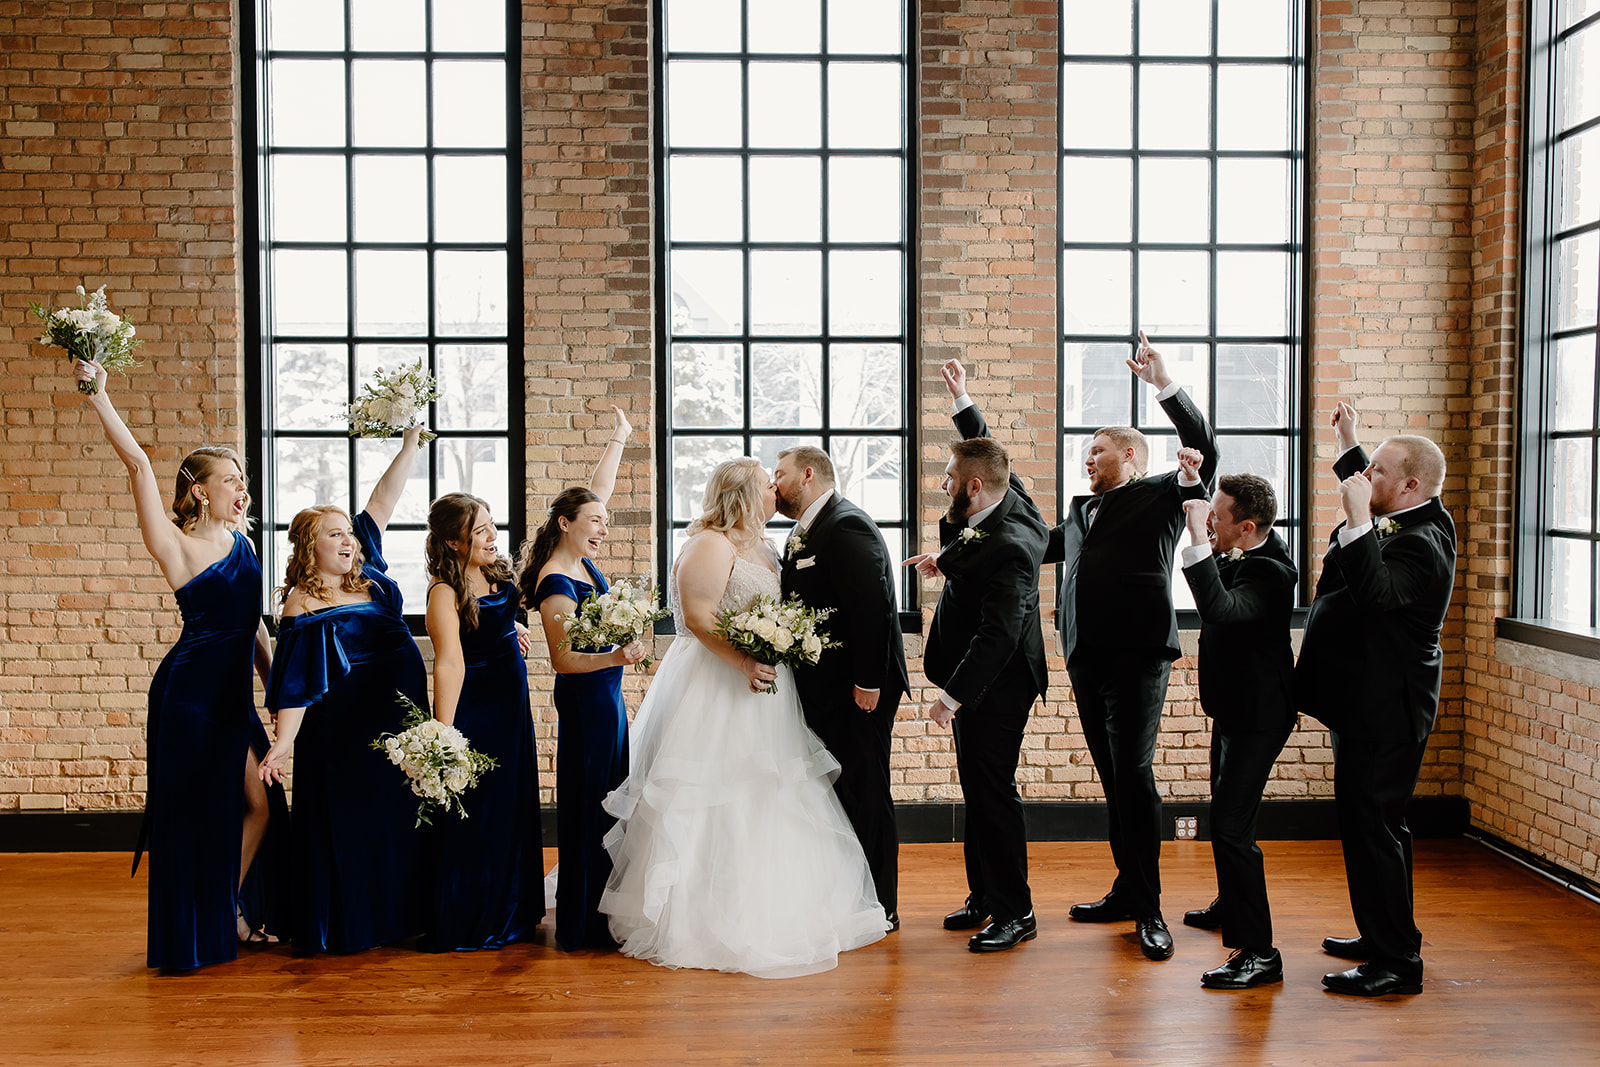 Wedding party cheering as bride and groom kiss